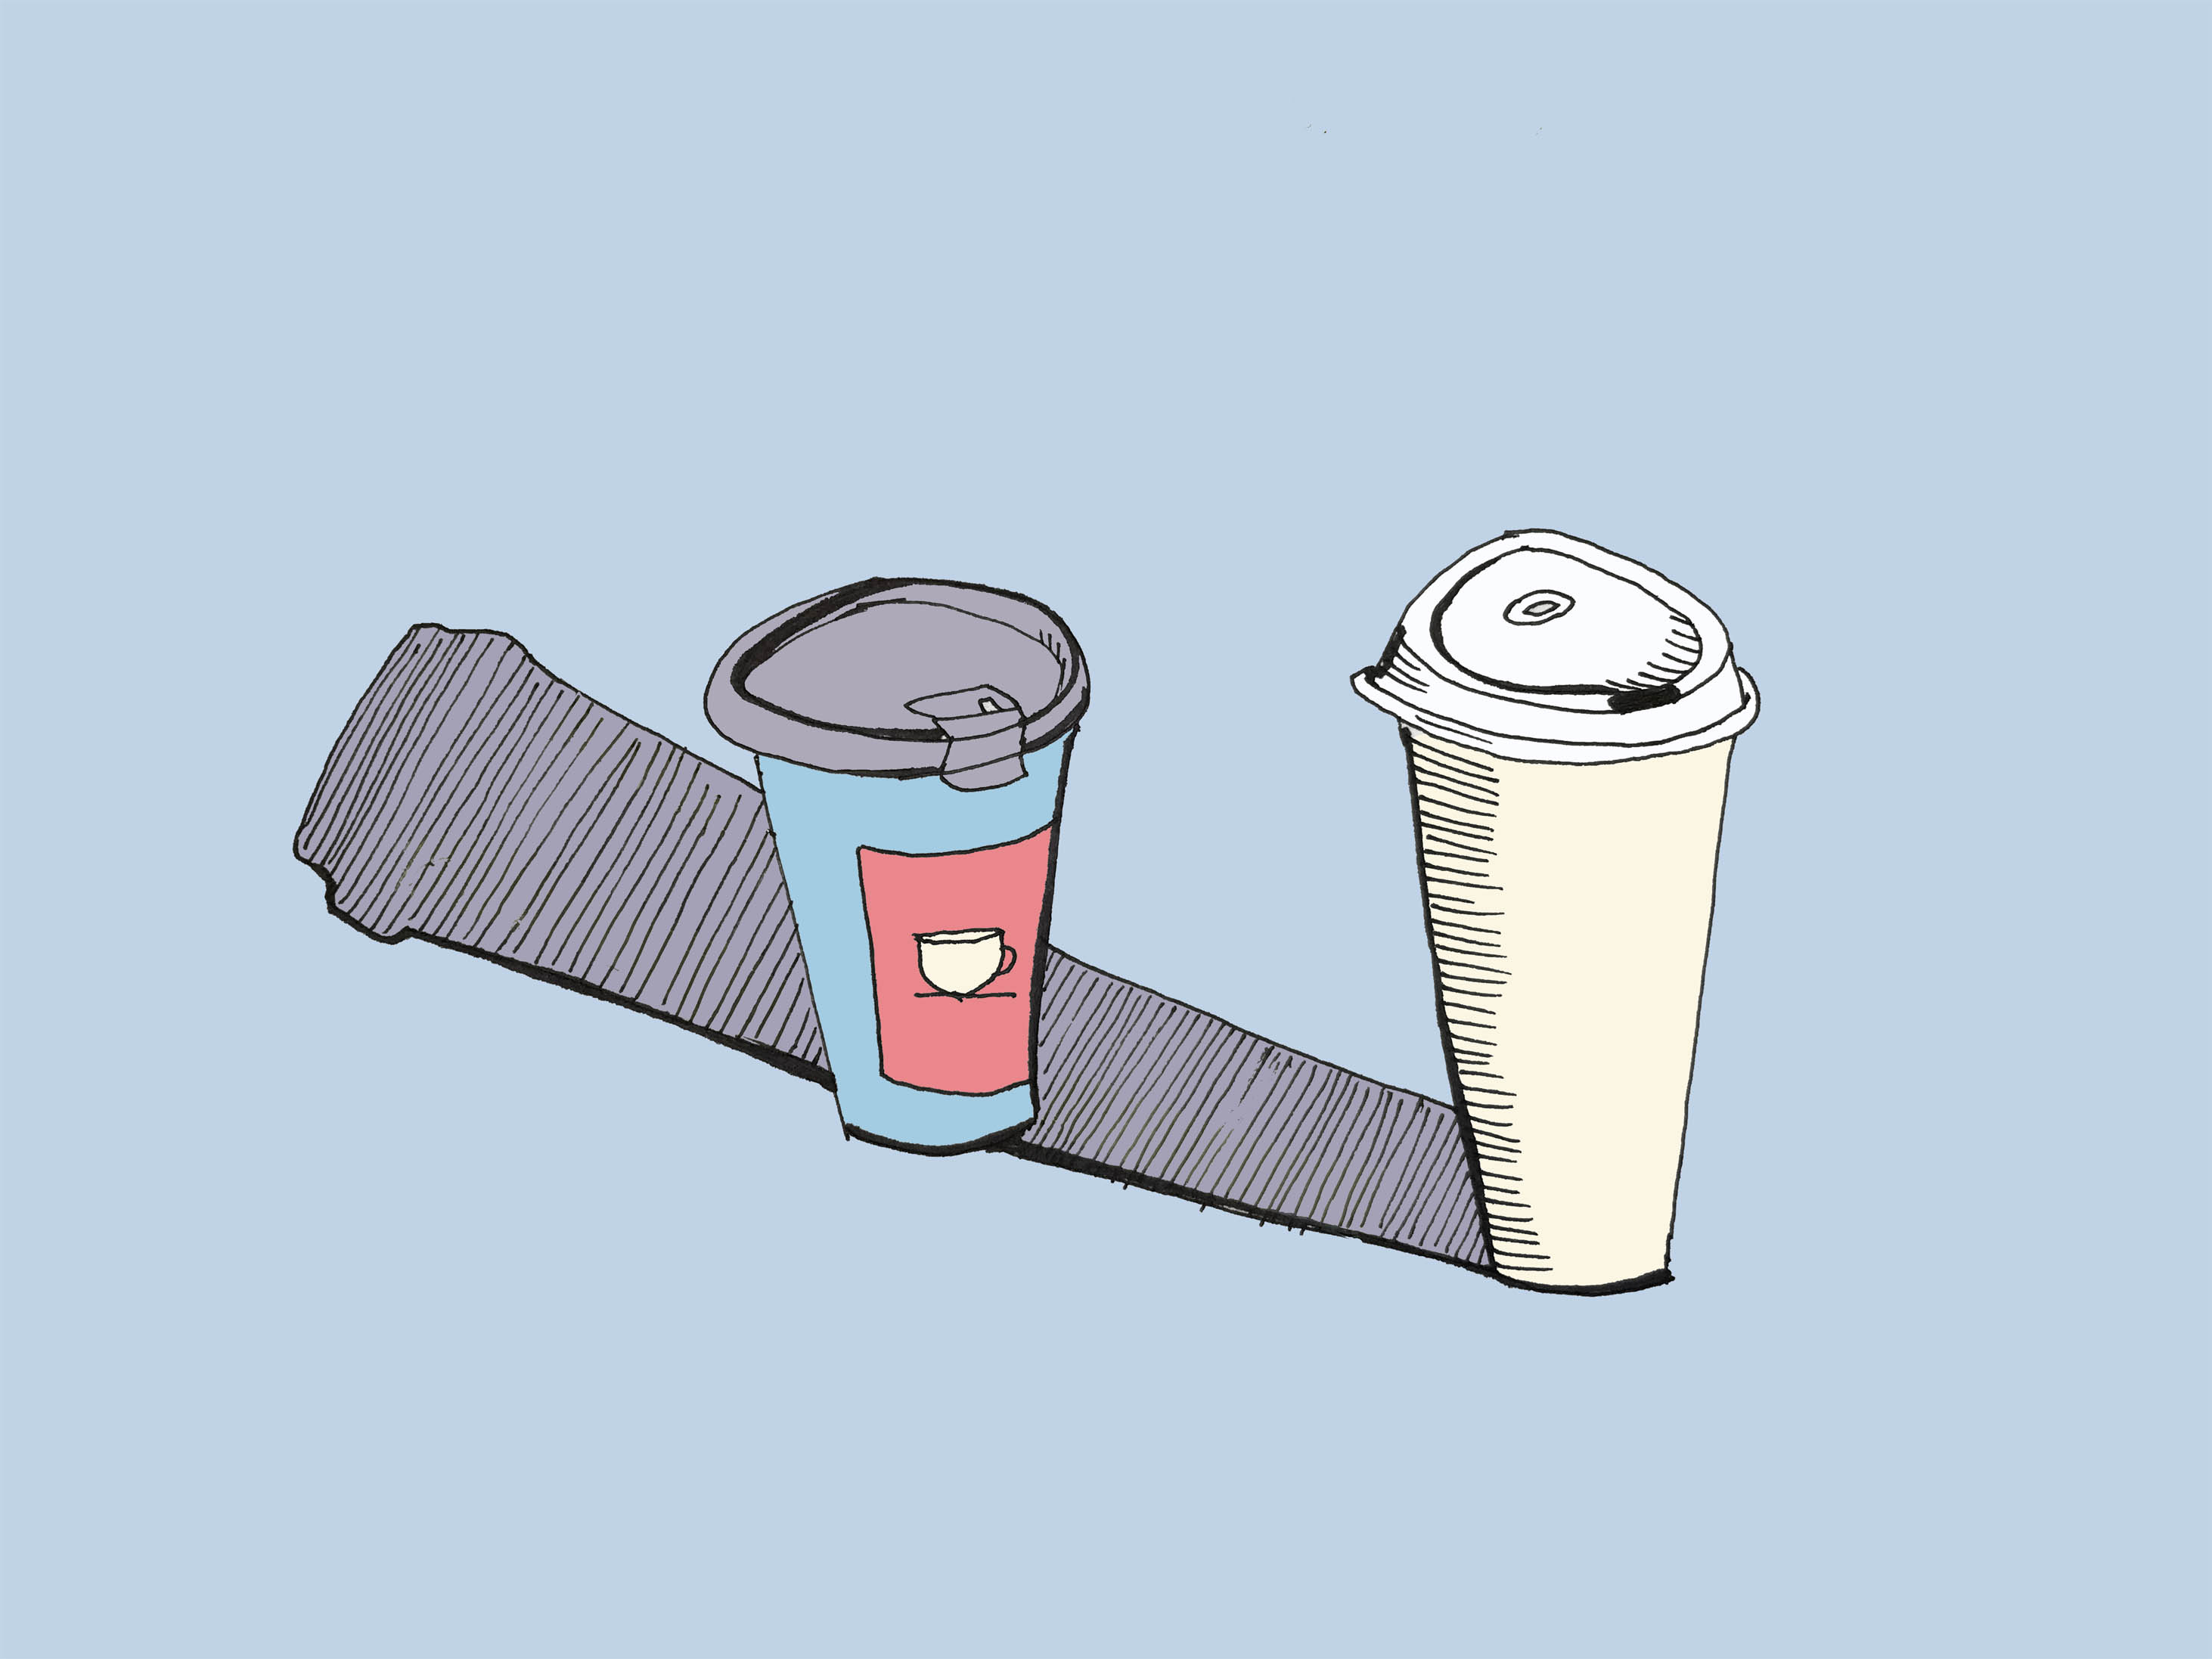 art every day number 269 / illustration / your morning brew